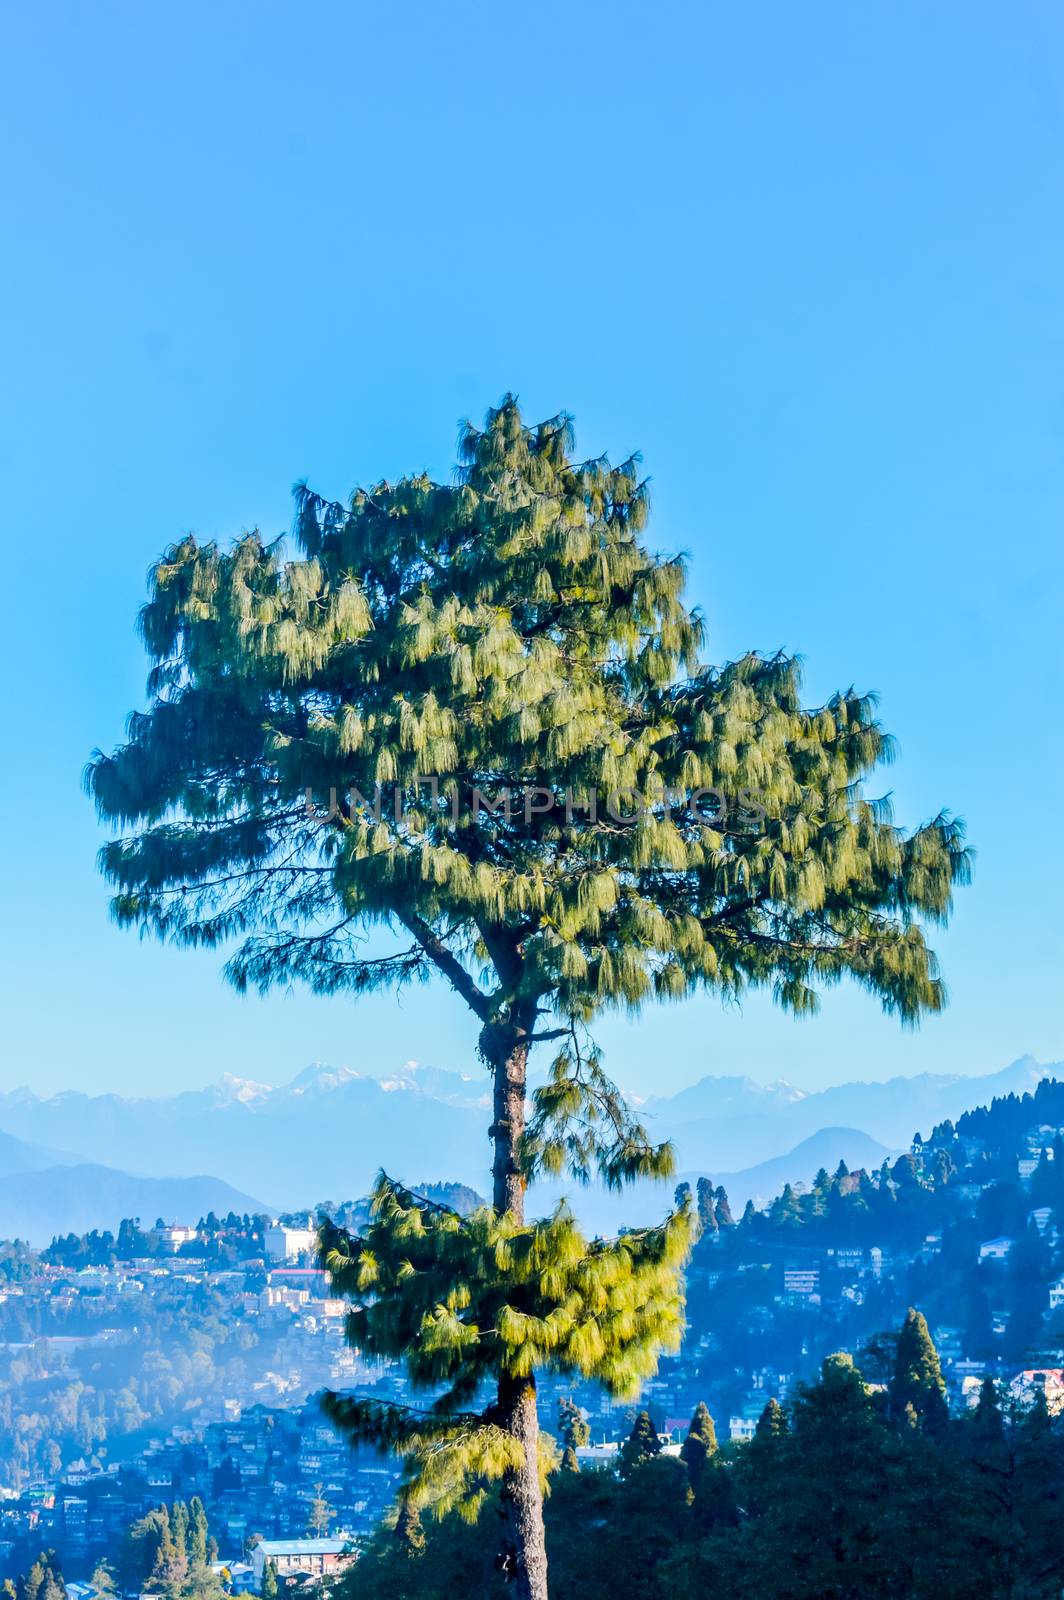 A needle pine conifer or blue pine (Pinus wallichiana) - a large Himalayan evergreen tree with a blue hue on its foliage standing alone against blue sky and distant Karakoram and Hindu Kush mountains.